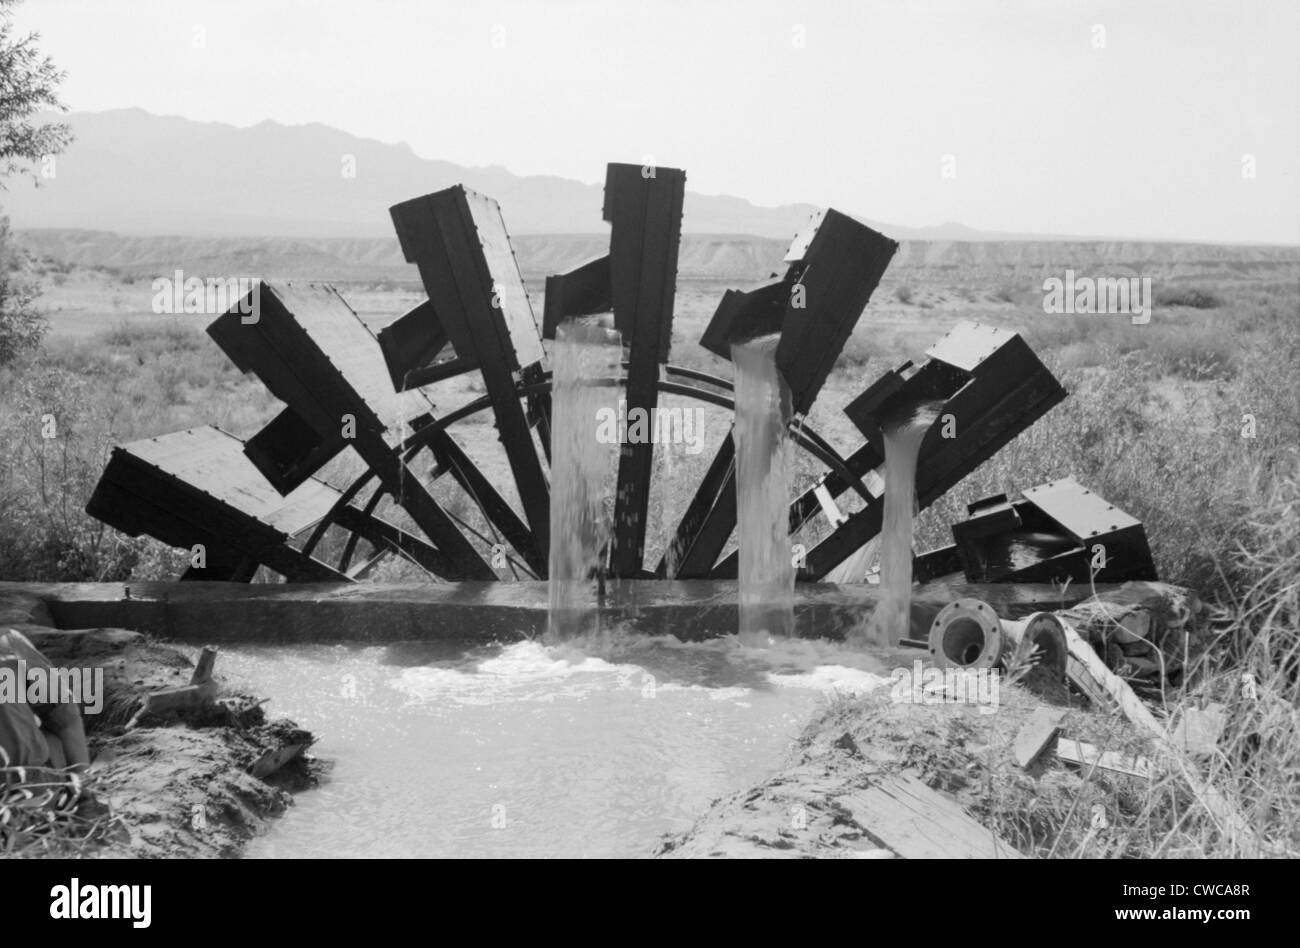 Waterwheel lifting water for crop irrigation in Mohave County, Arizona. Sept. 1940. Stock Photo